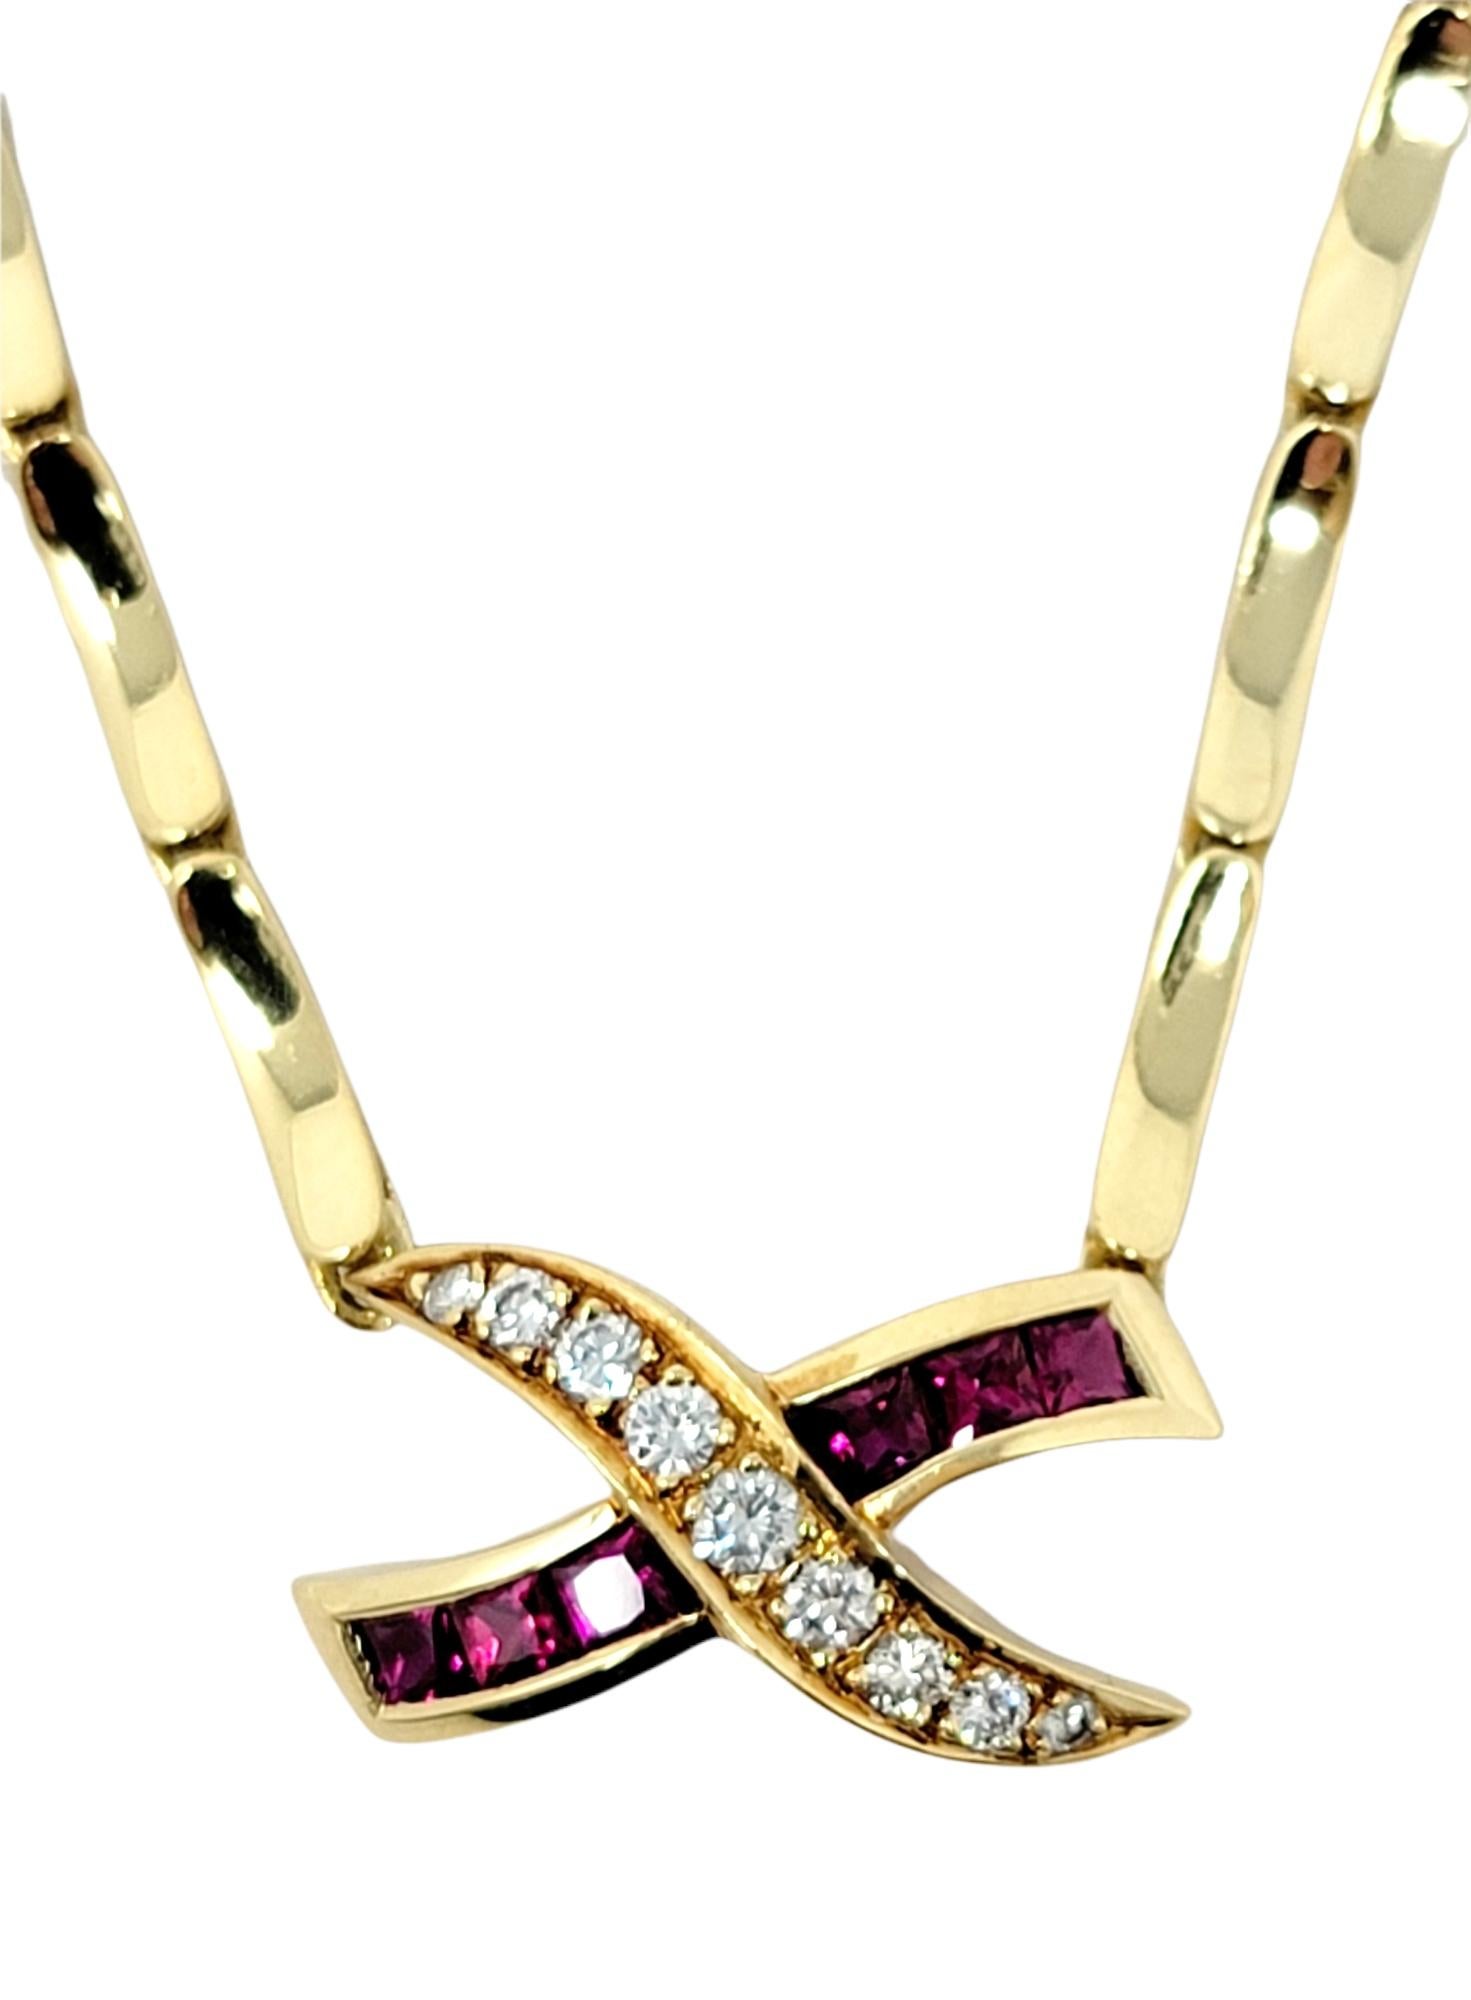 Elegant ruby and diamond 'X' pendant necklace set on a unique curved bar link chain in 18 karat yellow gold. The modern design gently hugs the neck and offers a subtle hint of color. 

Metal: 18K Yellow Gold
Natural Diamonds: .22 ctw
Diamond cut: